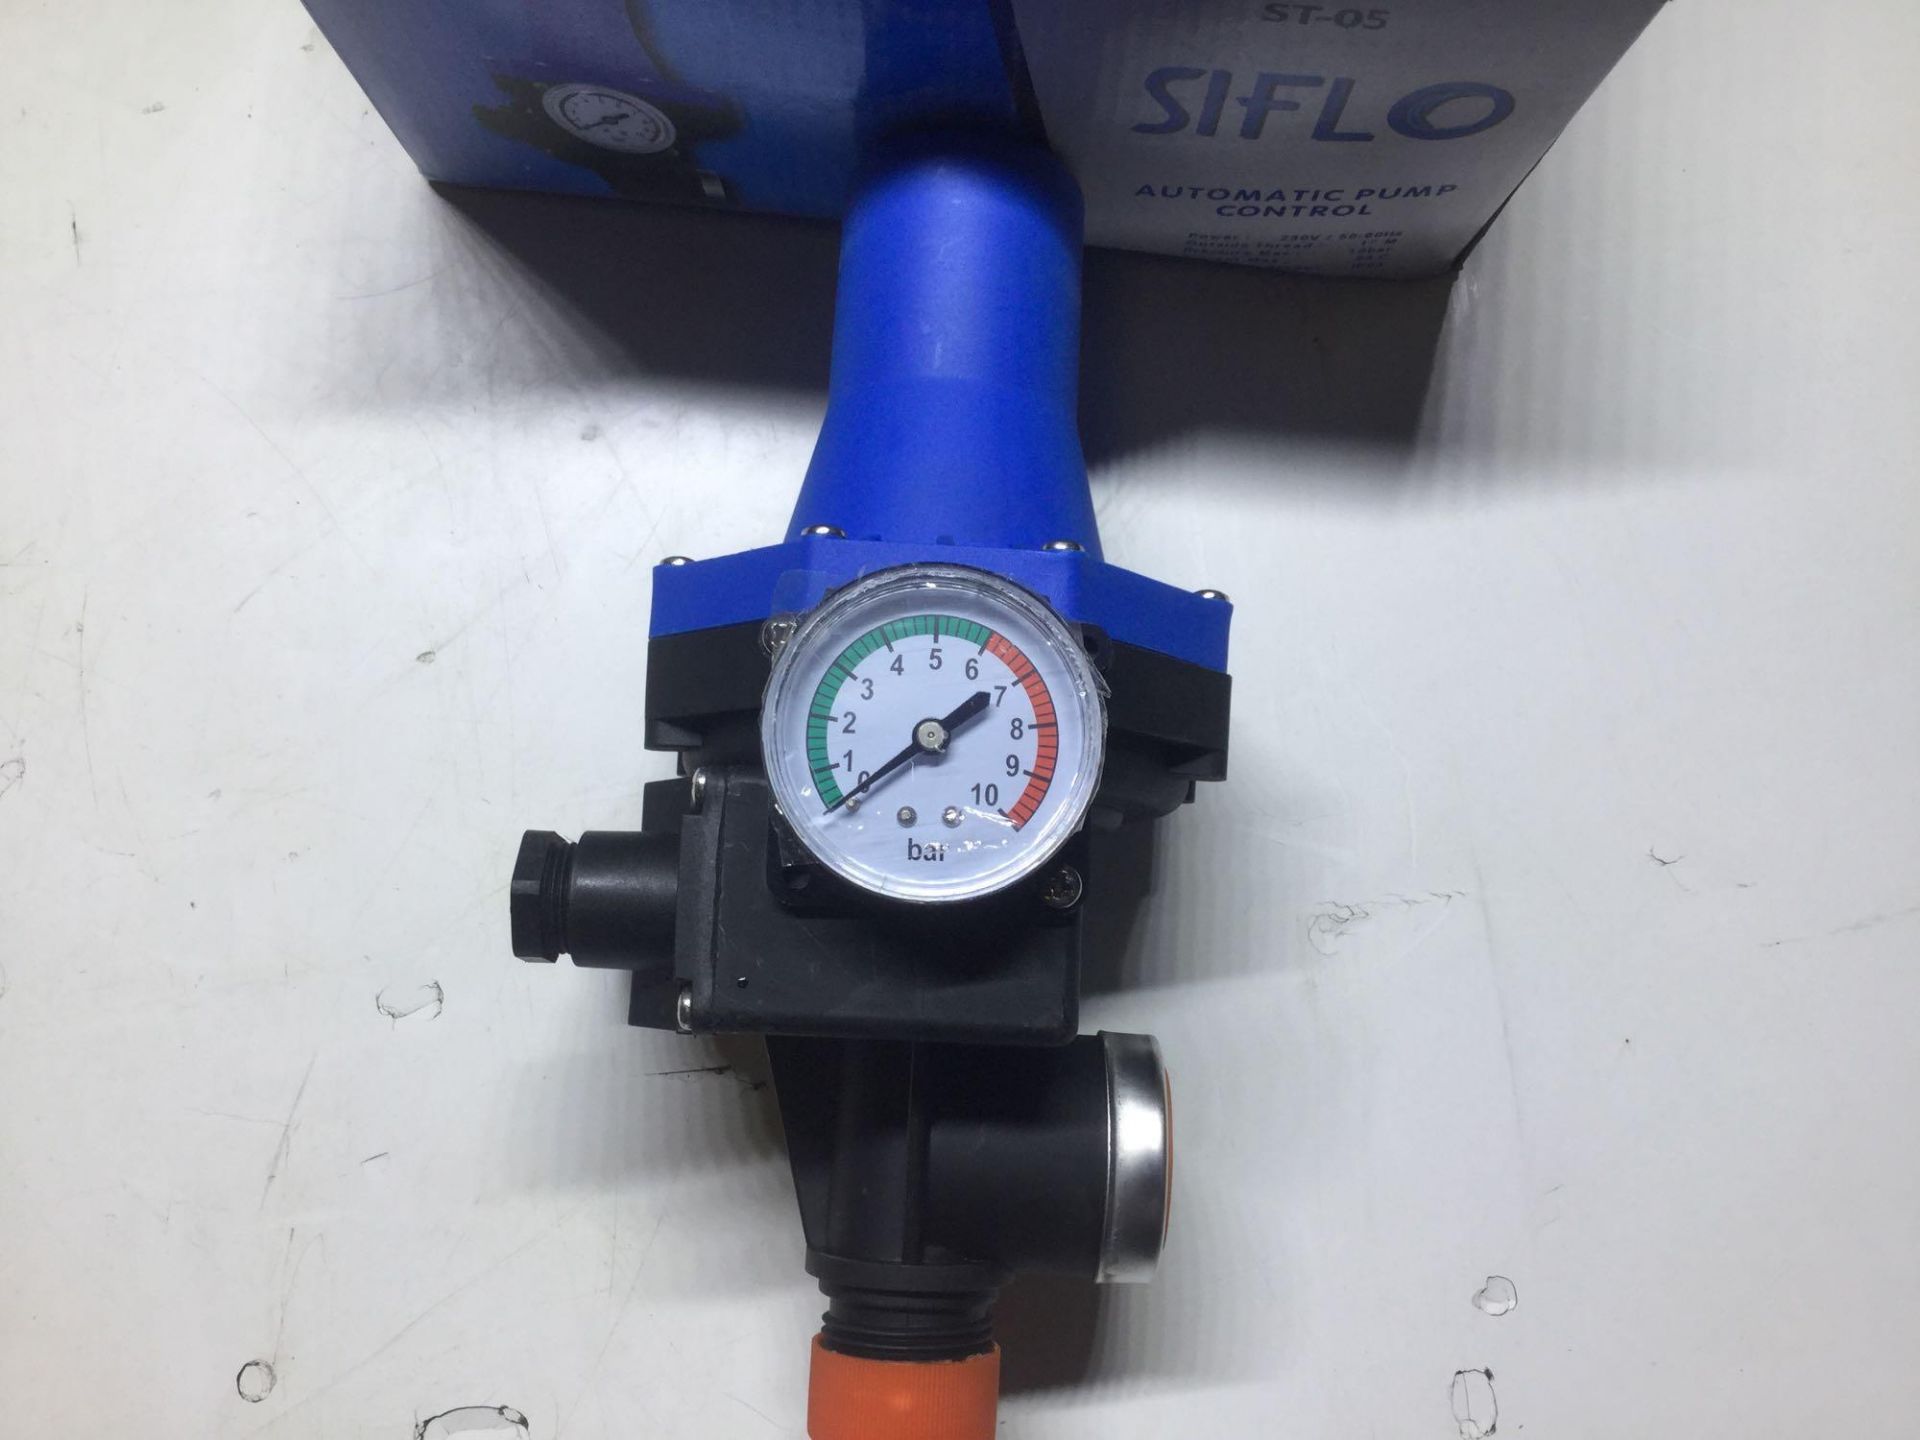 Siflo Automatic Control Pump (New) - Image 2 of 3